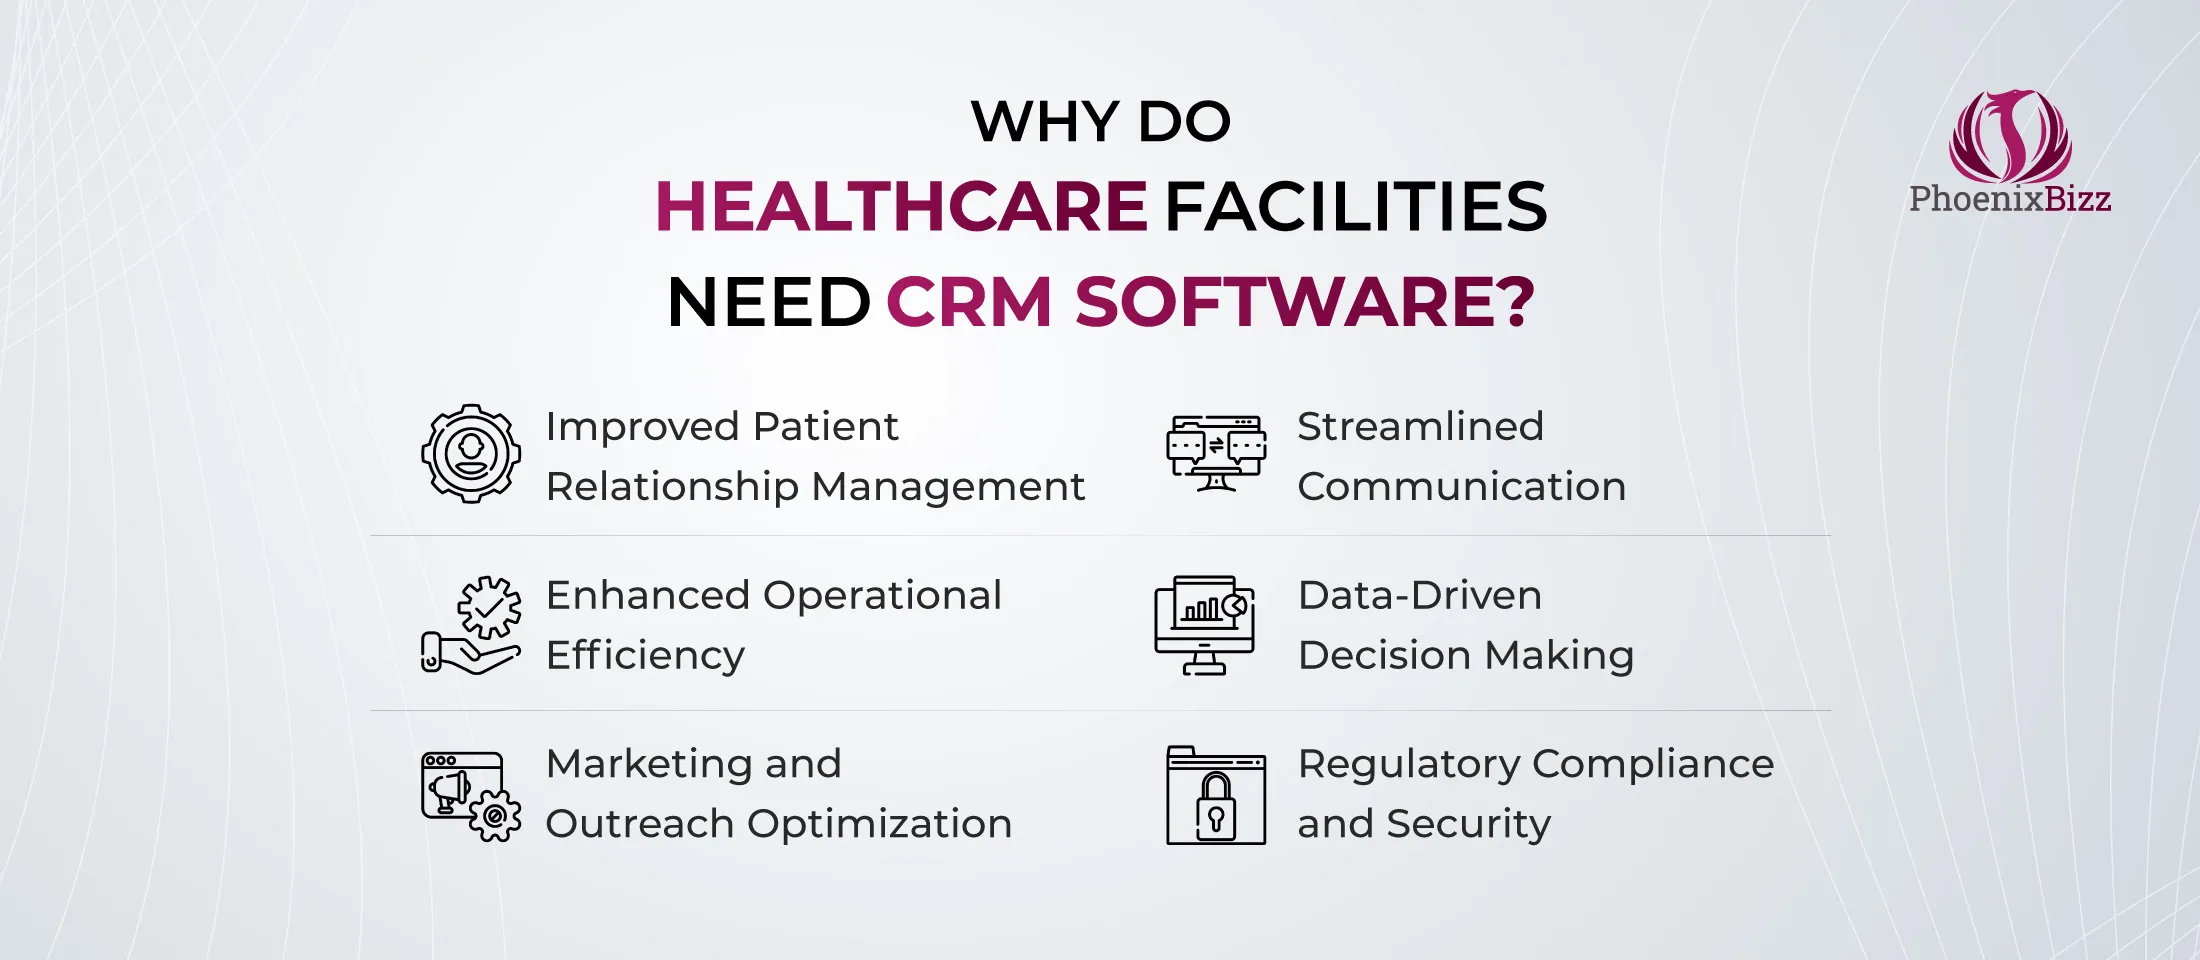 Why do healthcare facilities need CRM software